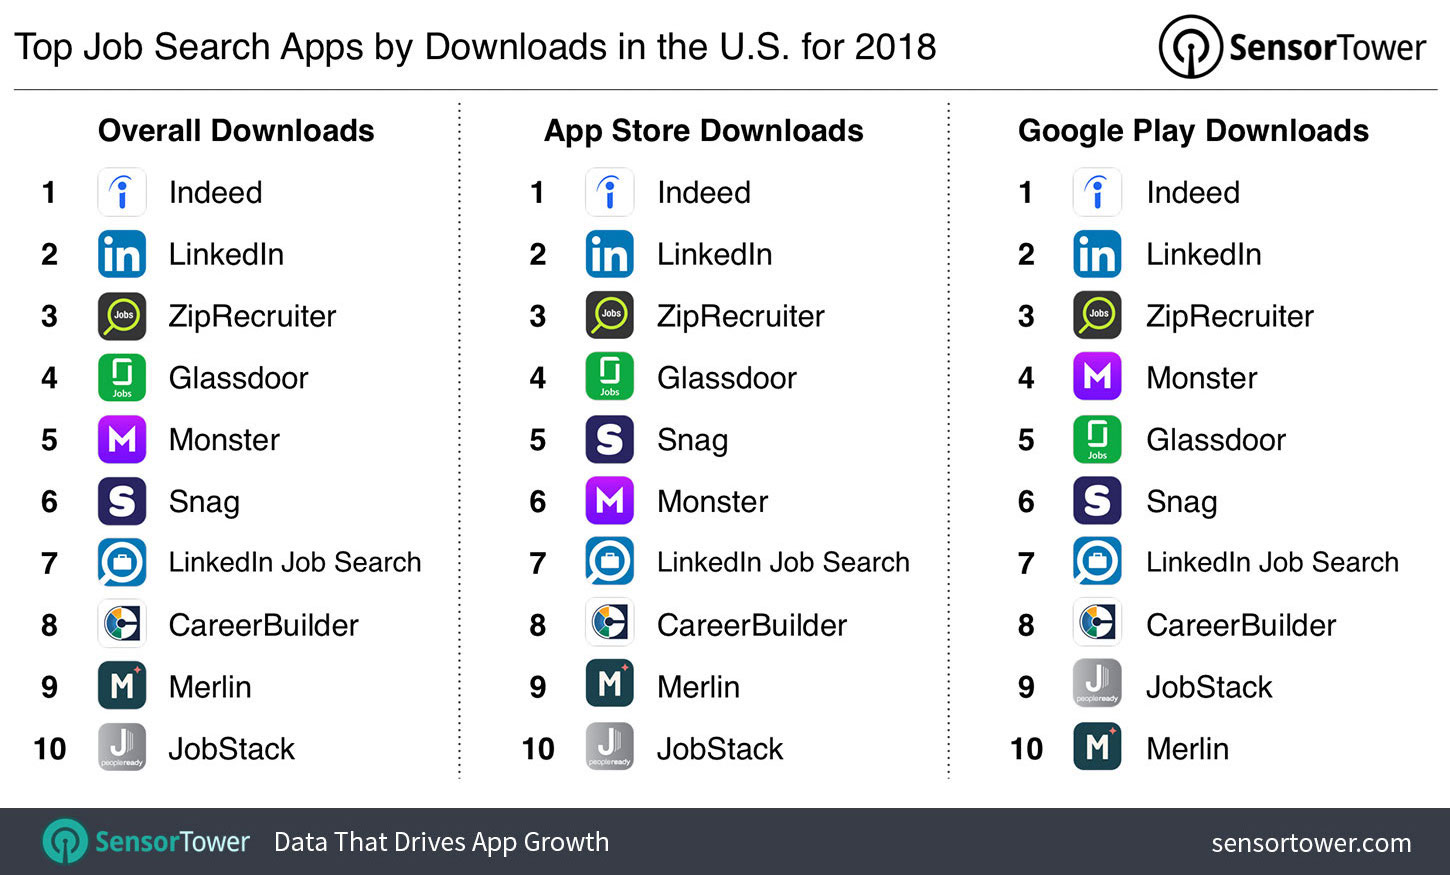 Top Job Search Apps in the U.S. for 2018